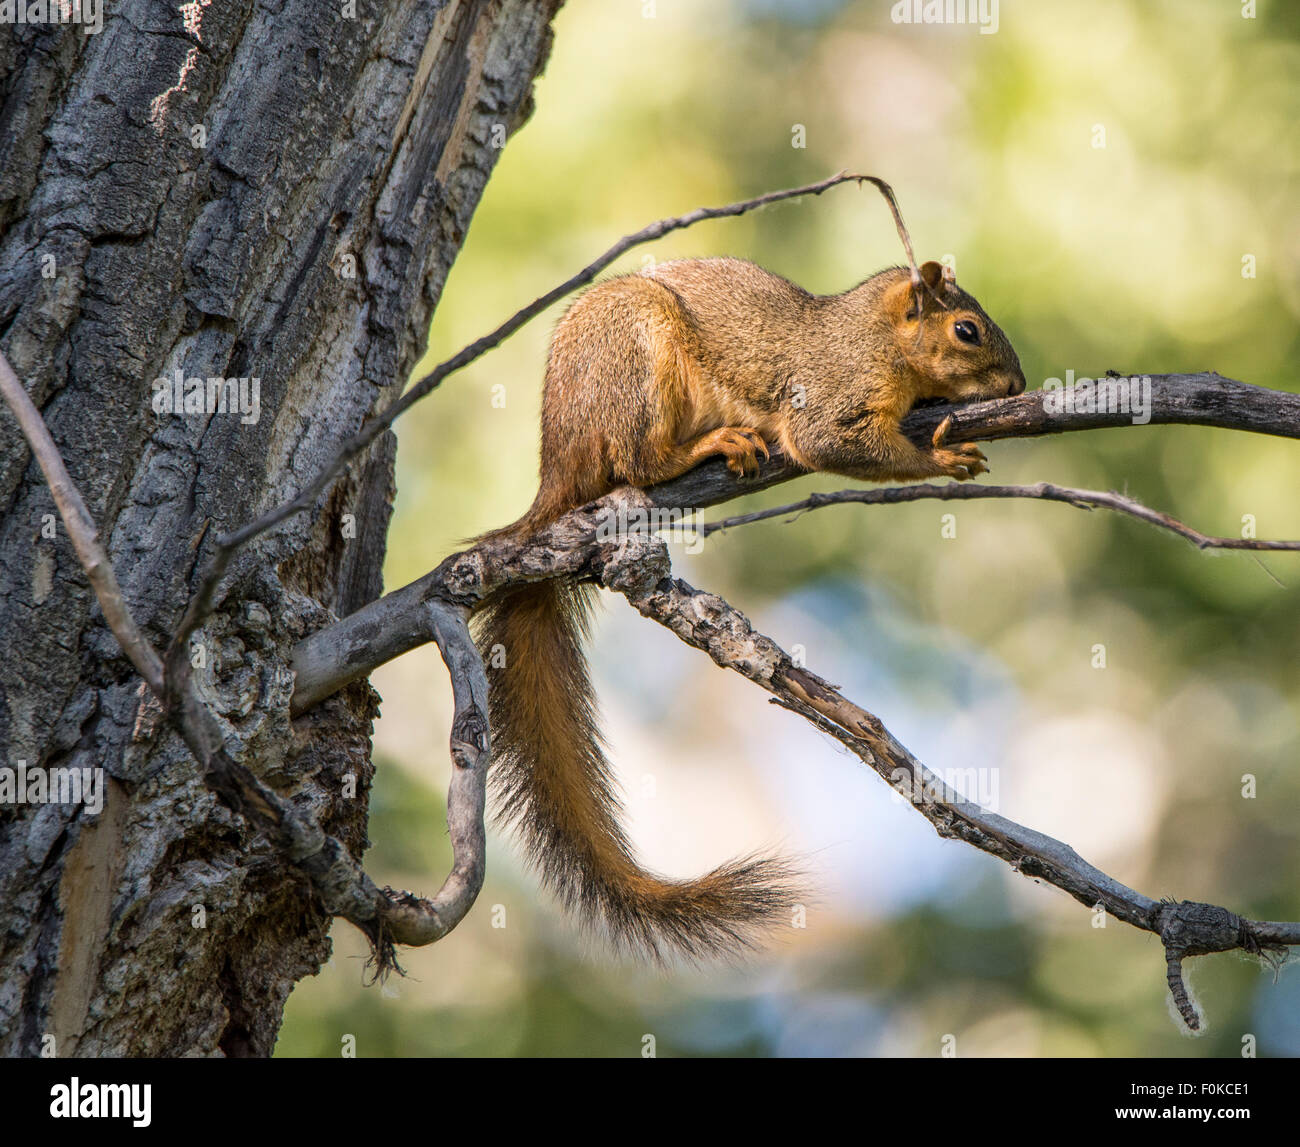 Animal, rodent, Brown Squirrel on tree branch Idaho, USA Stock Photo